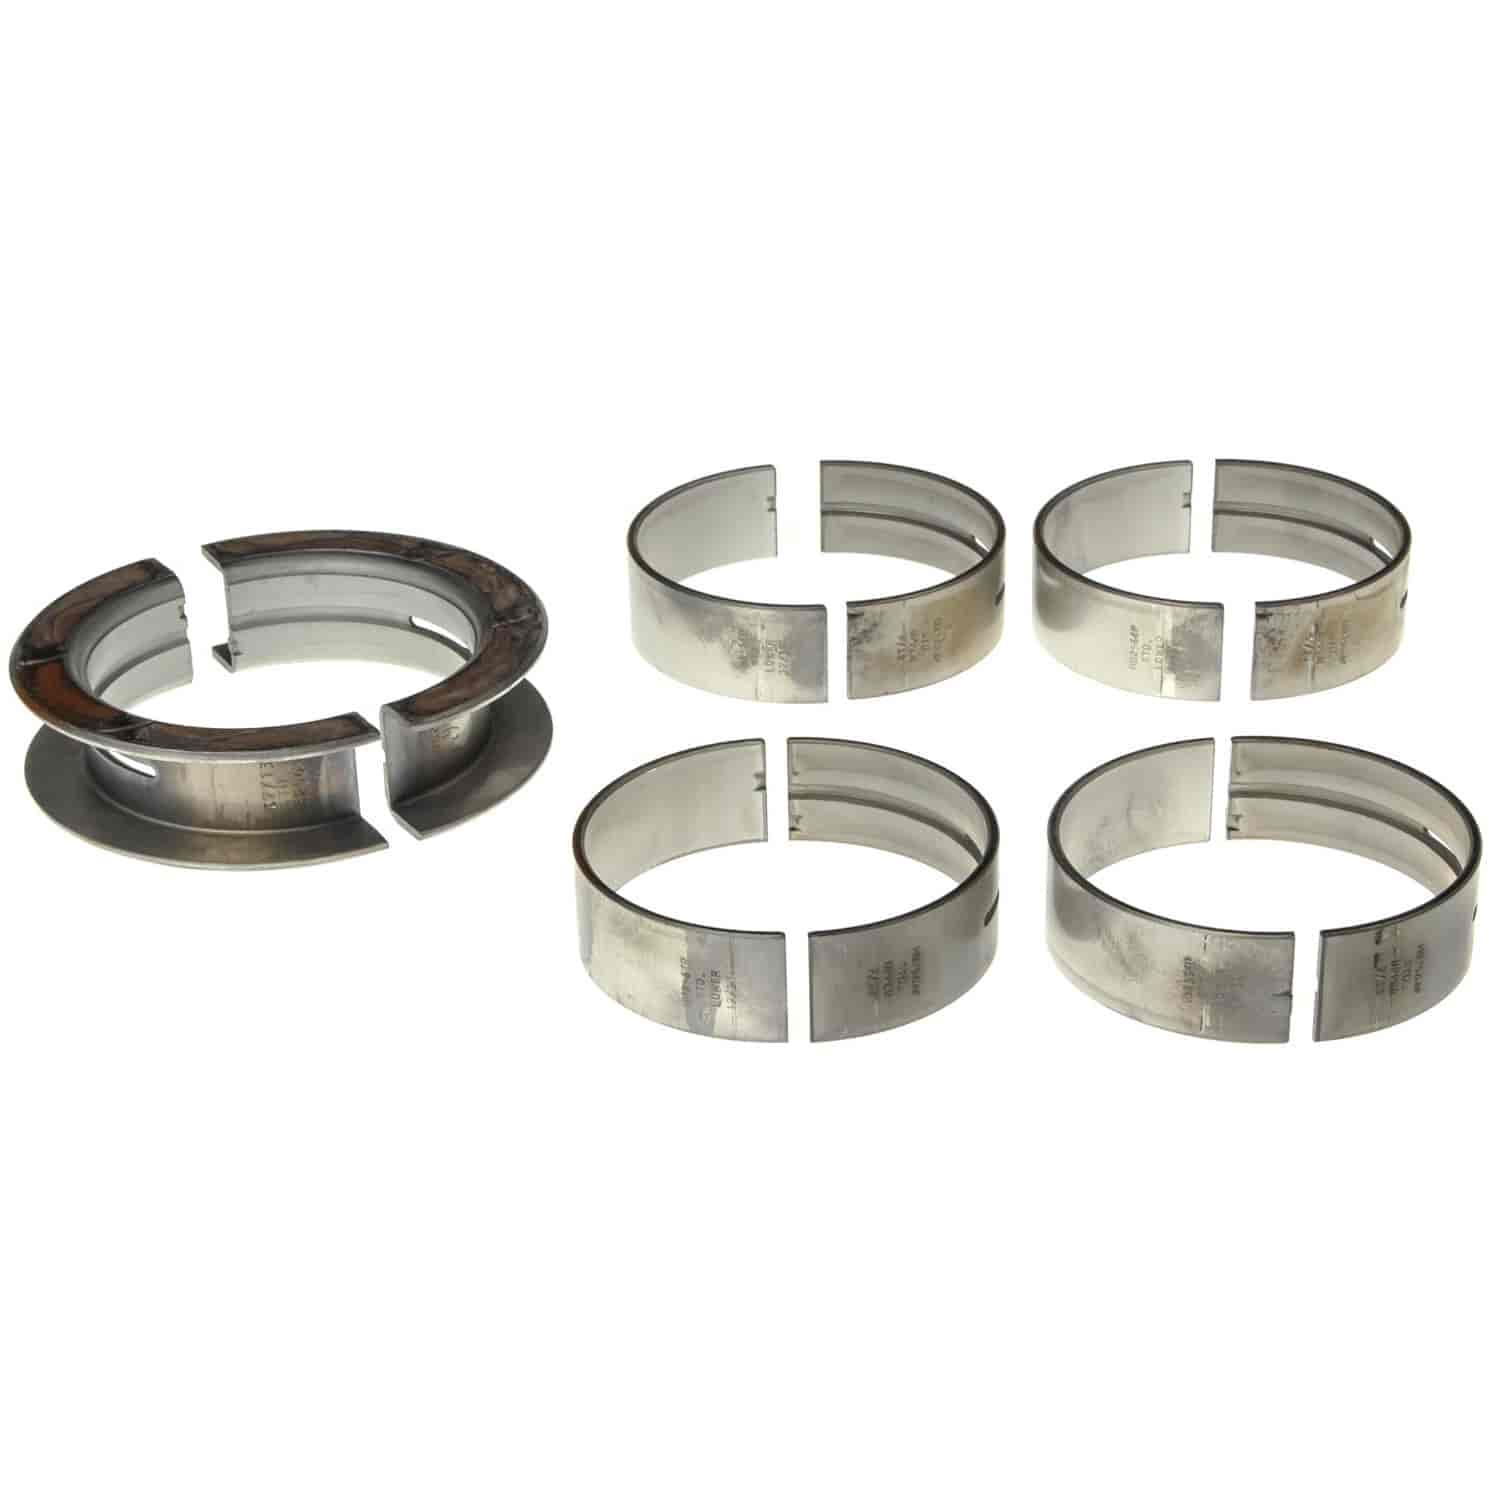 Main Bearing Set Ford 1968-1997 V8 370/429/460 (6.1/7.0/7.5L) with -.030" Undersize